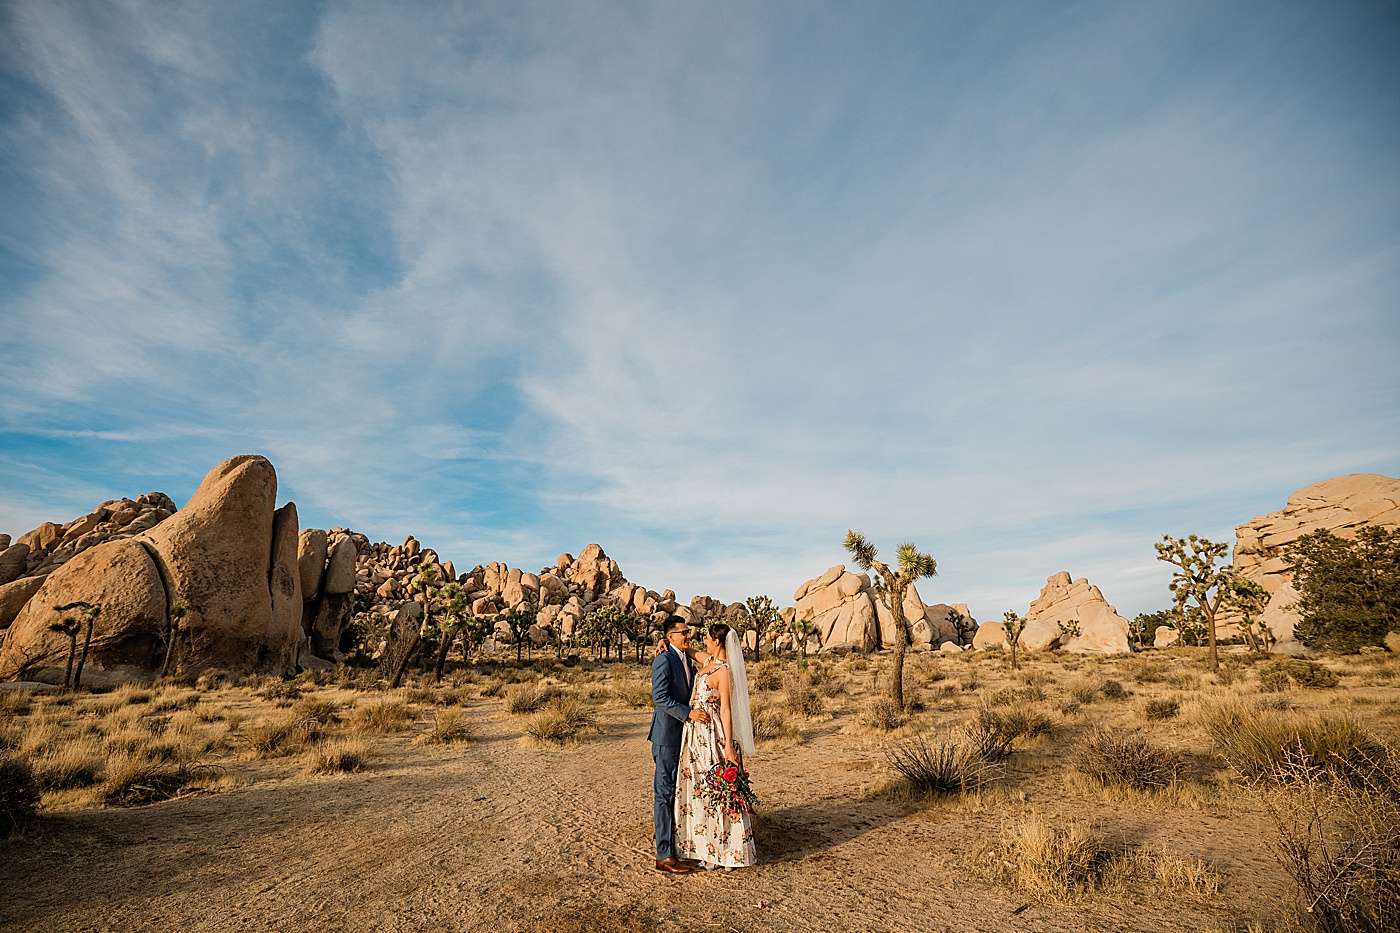 Elopement in Joshua Tree National Park. Bride and groom embracing in front of Joshua Trees and rock formations.